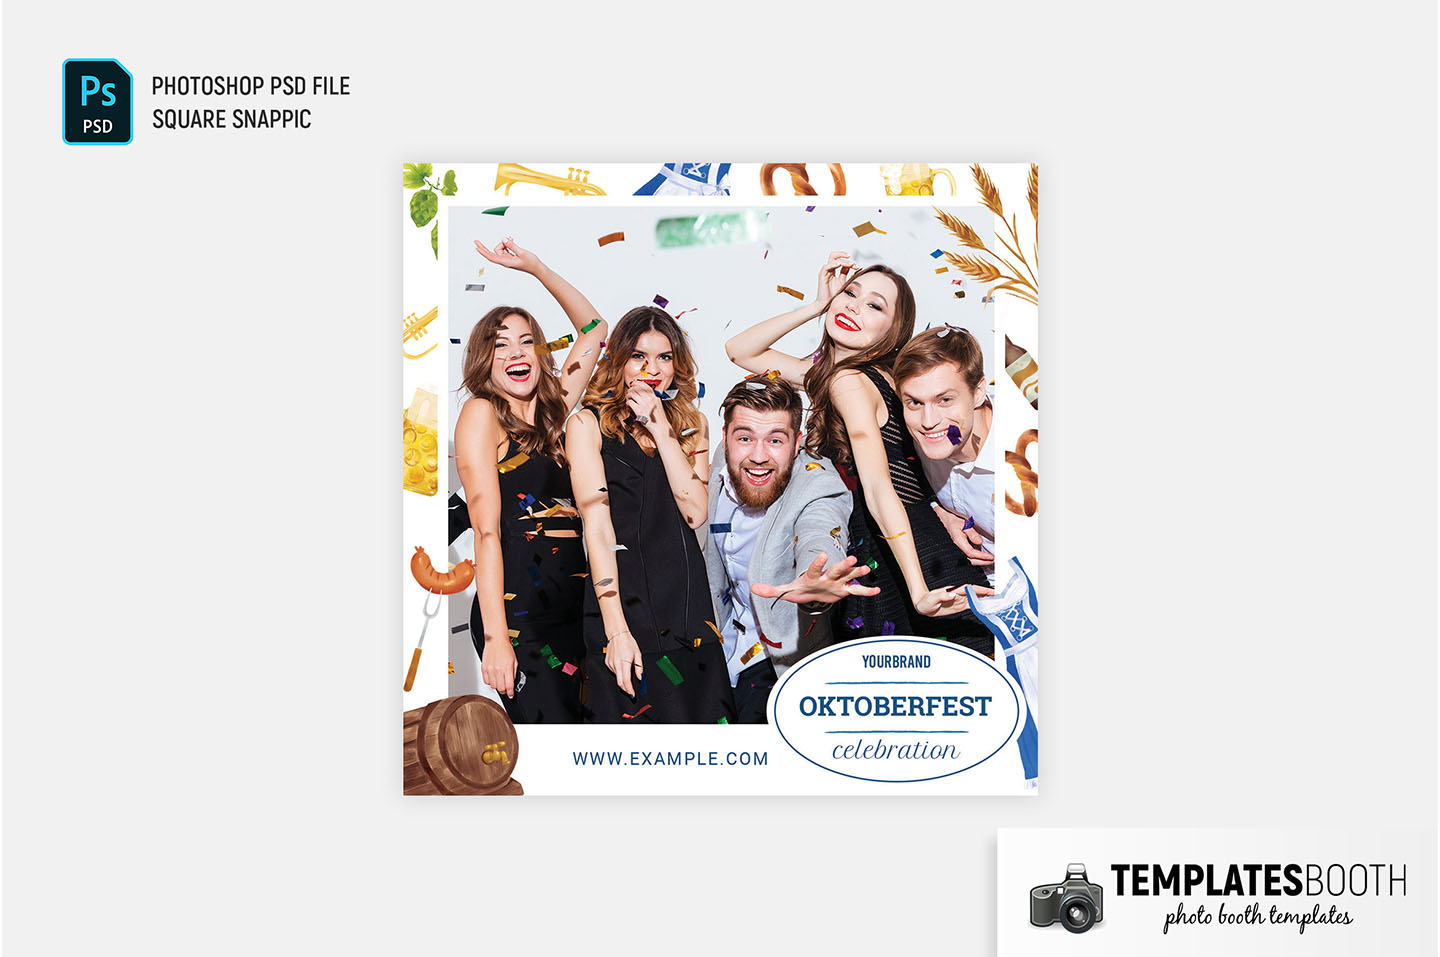 Oktoberfest Photo Booth Template for DSLR Booth, Photoshop & PNG